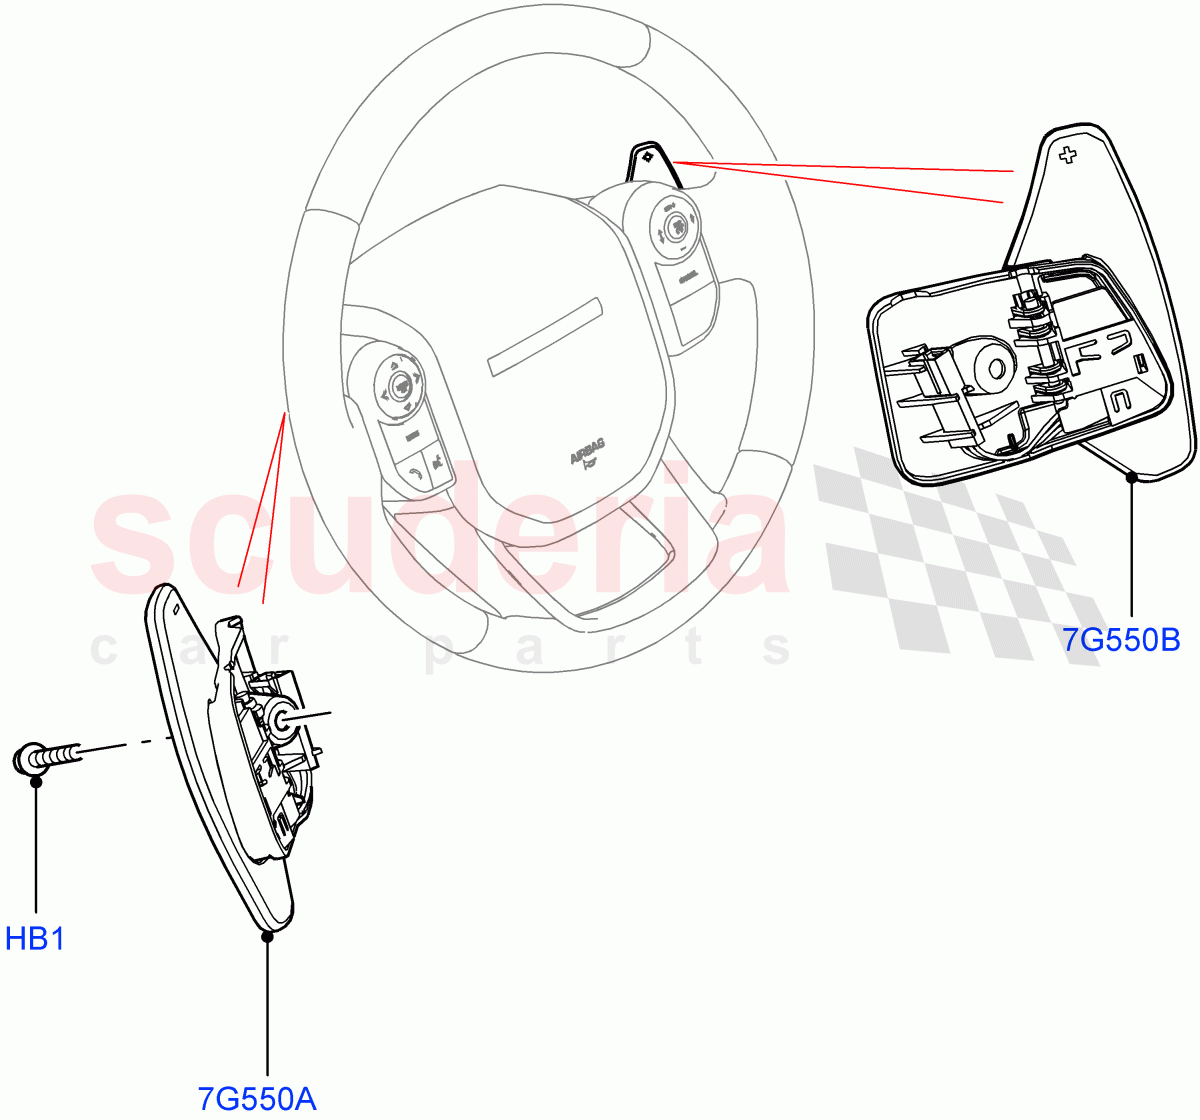 Gear Change-Automatic Transmission(Steering Wheel)(9 Speed Auto Trans 9HP50,Changsu (China),Paddle Shift,Paddle Shift - Noble)((V)FROMKG006088) of Land Rover Land Rover Range Rover Evoque (2019+) [2.0 Turbo Diesel]